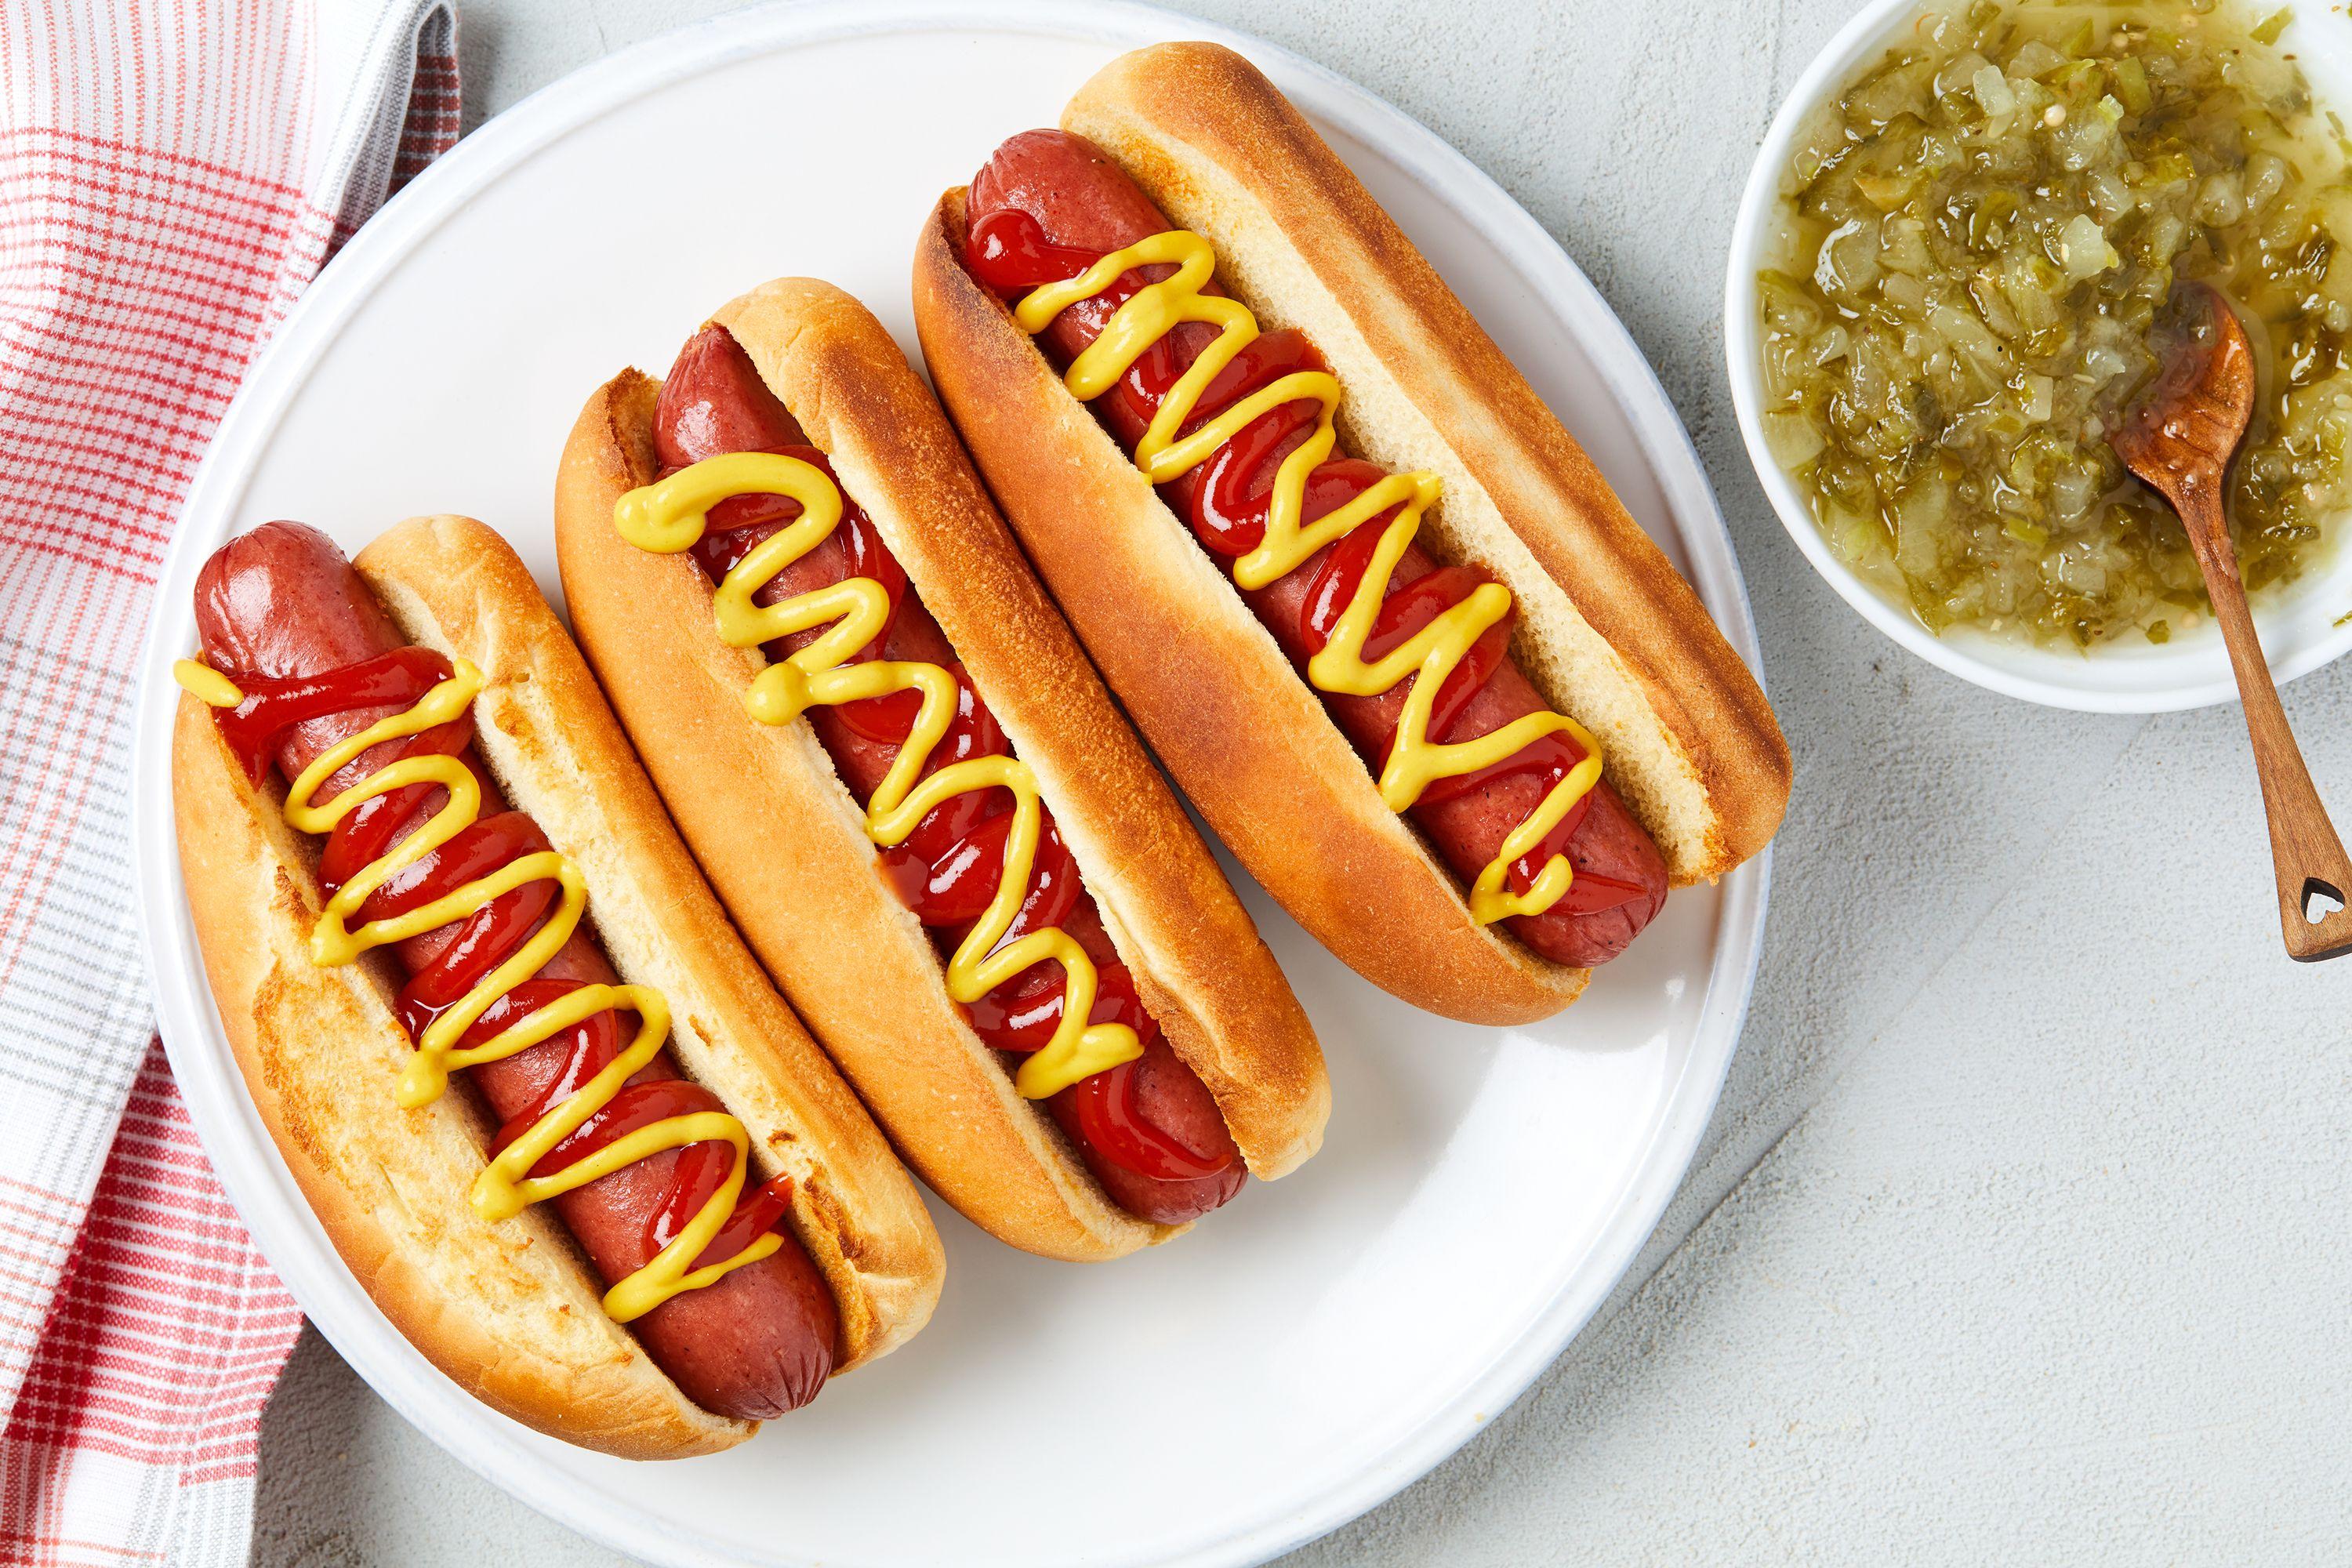 Top 25 Hot Dog Songs Of All-Time